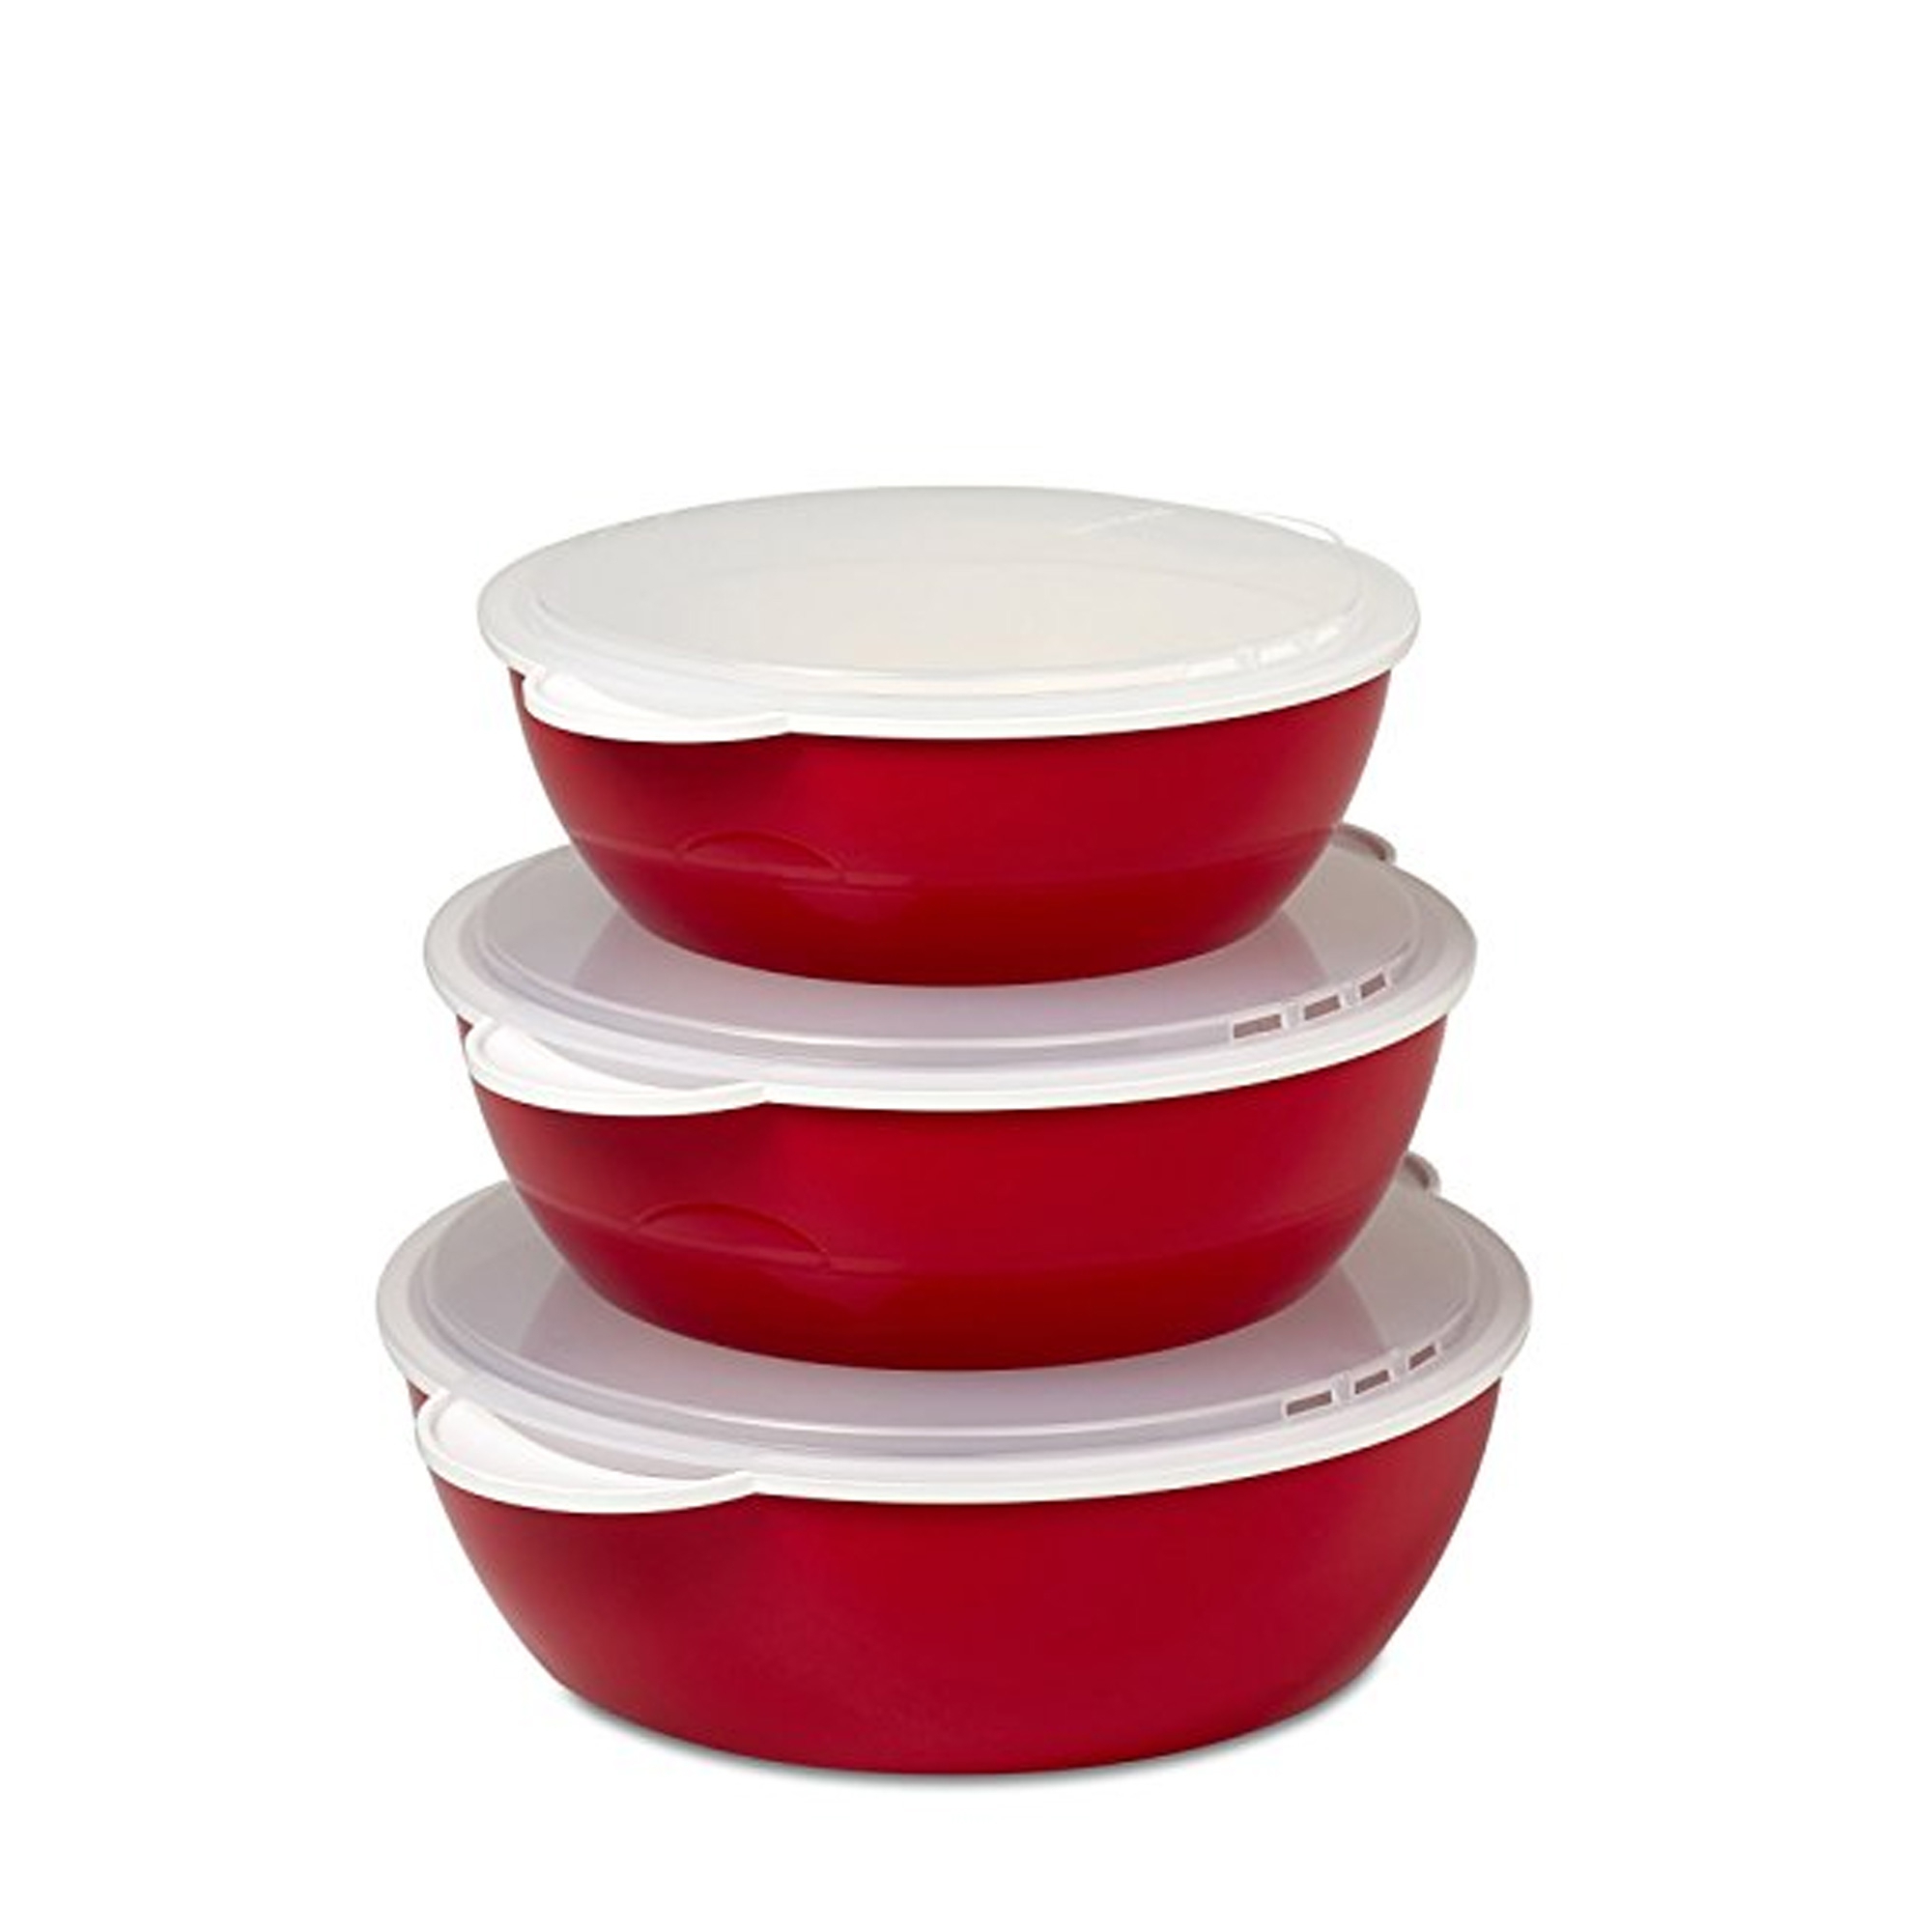 Mepal - Ping bowls set of 3 - different colors